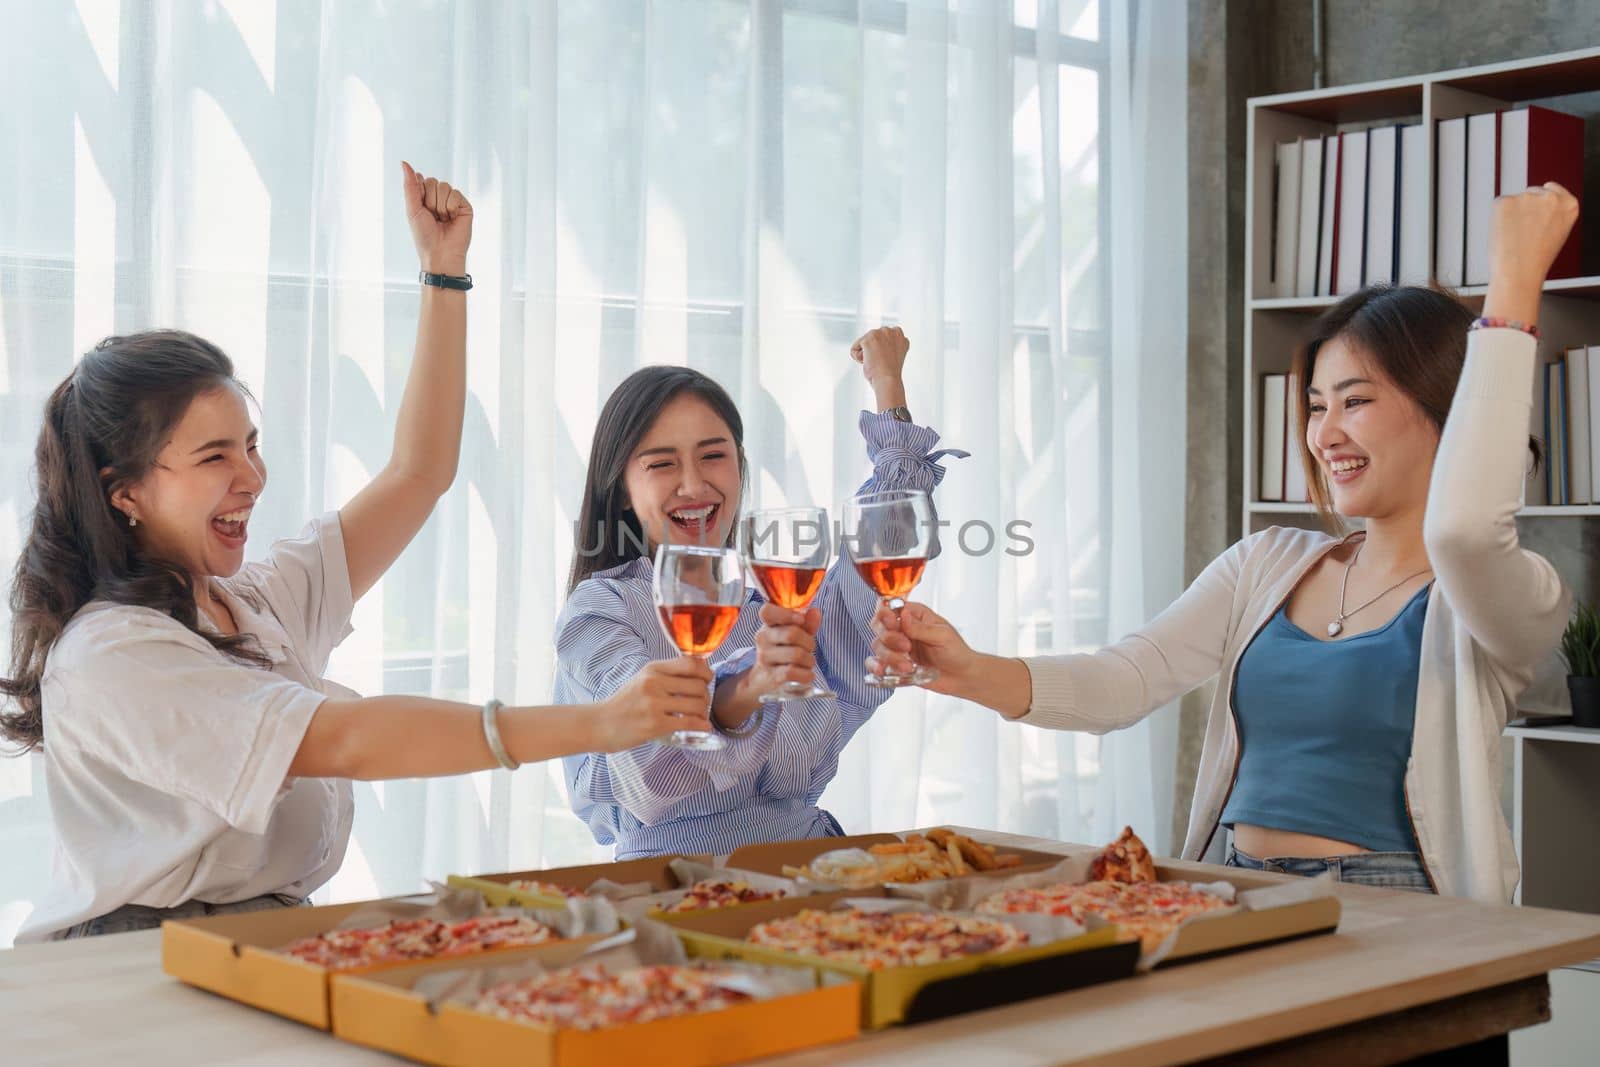 Friends at birthday party clinking glasses with champagne and pizza, enjoying Christmas vacation, pizza on the table. Holiday Party event.